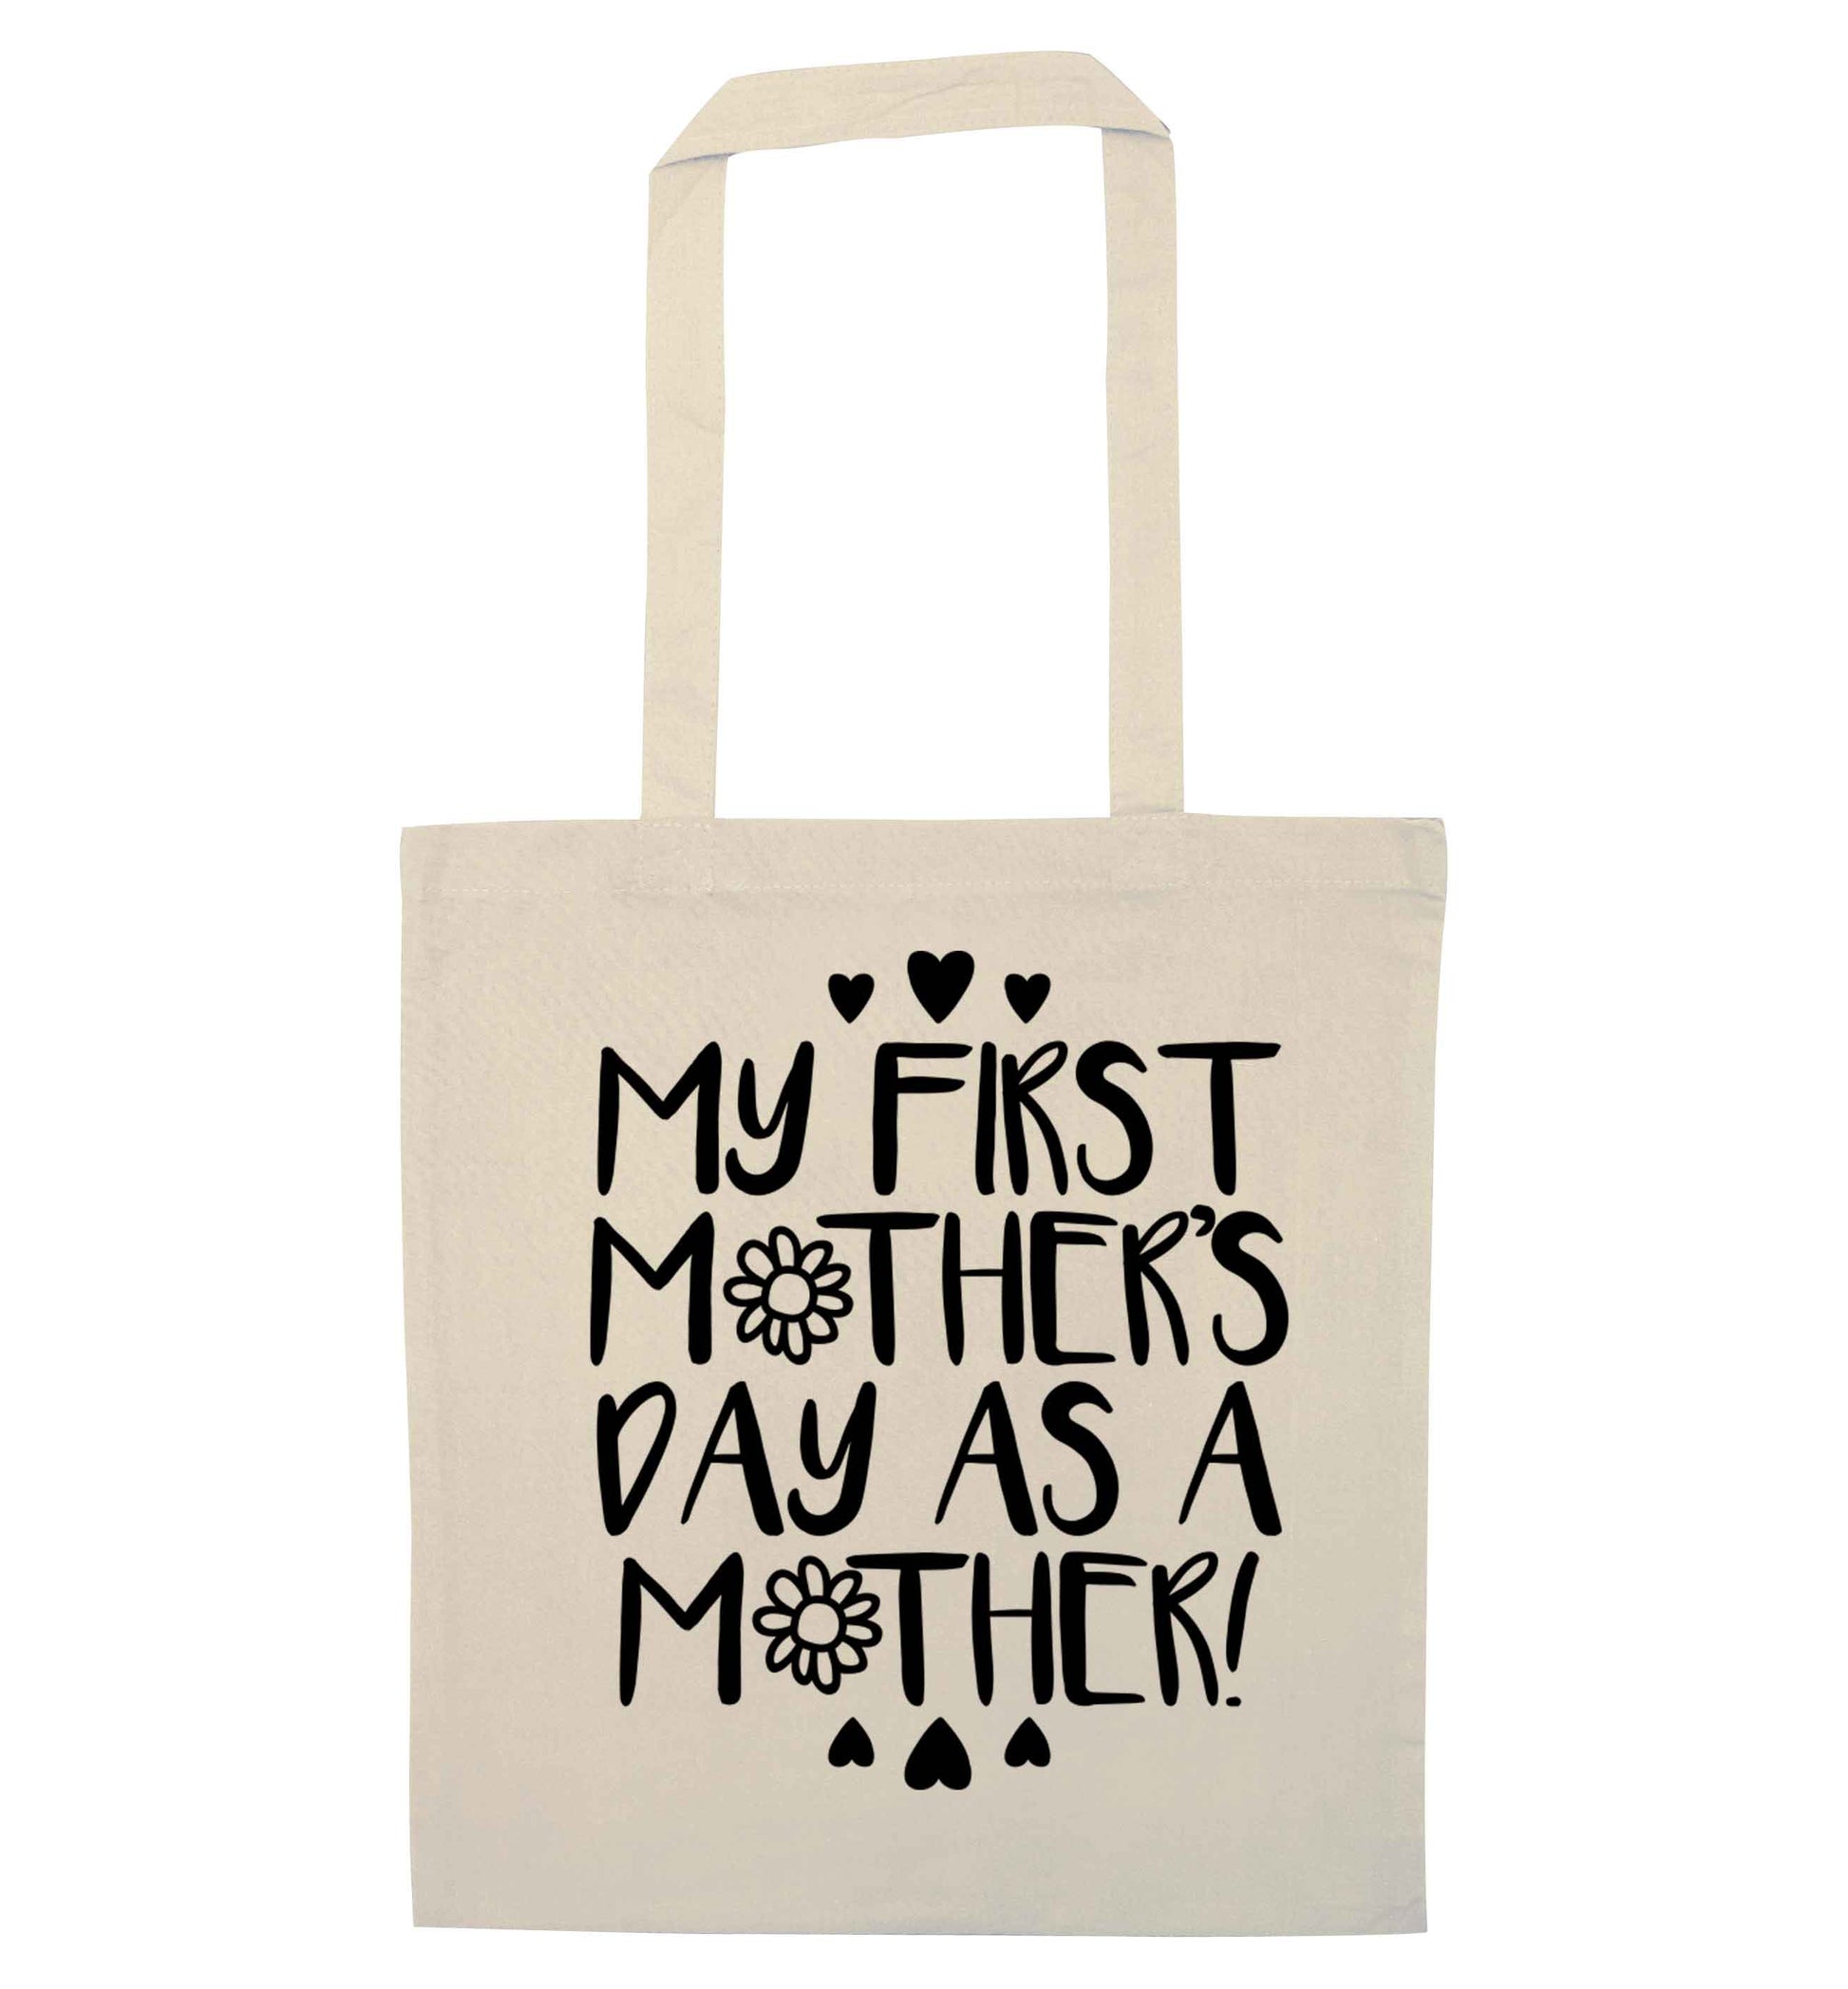 It's my first mother's day as a mother natural tote bag